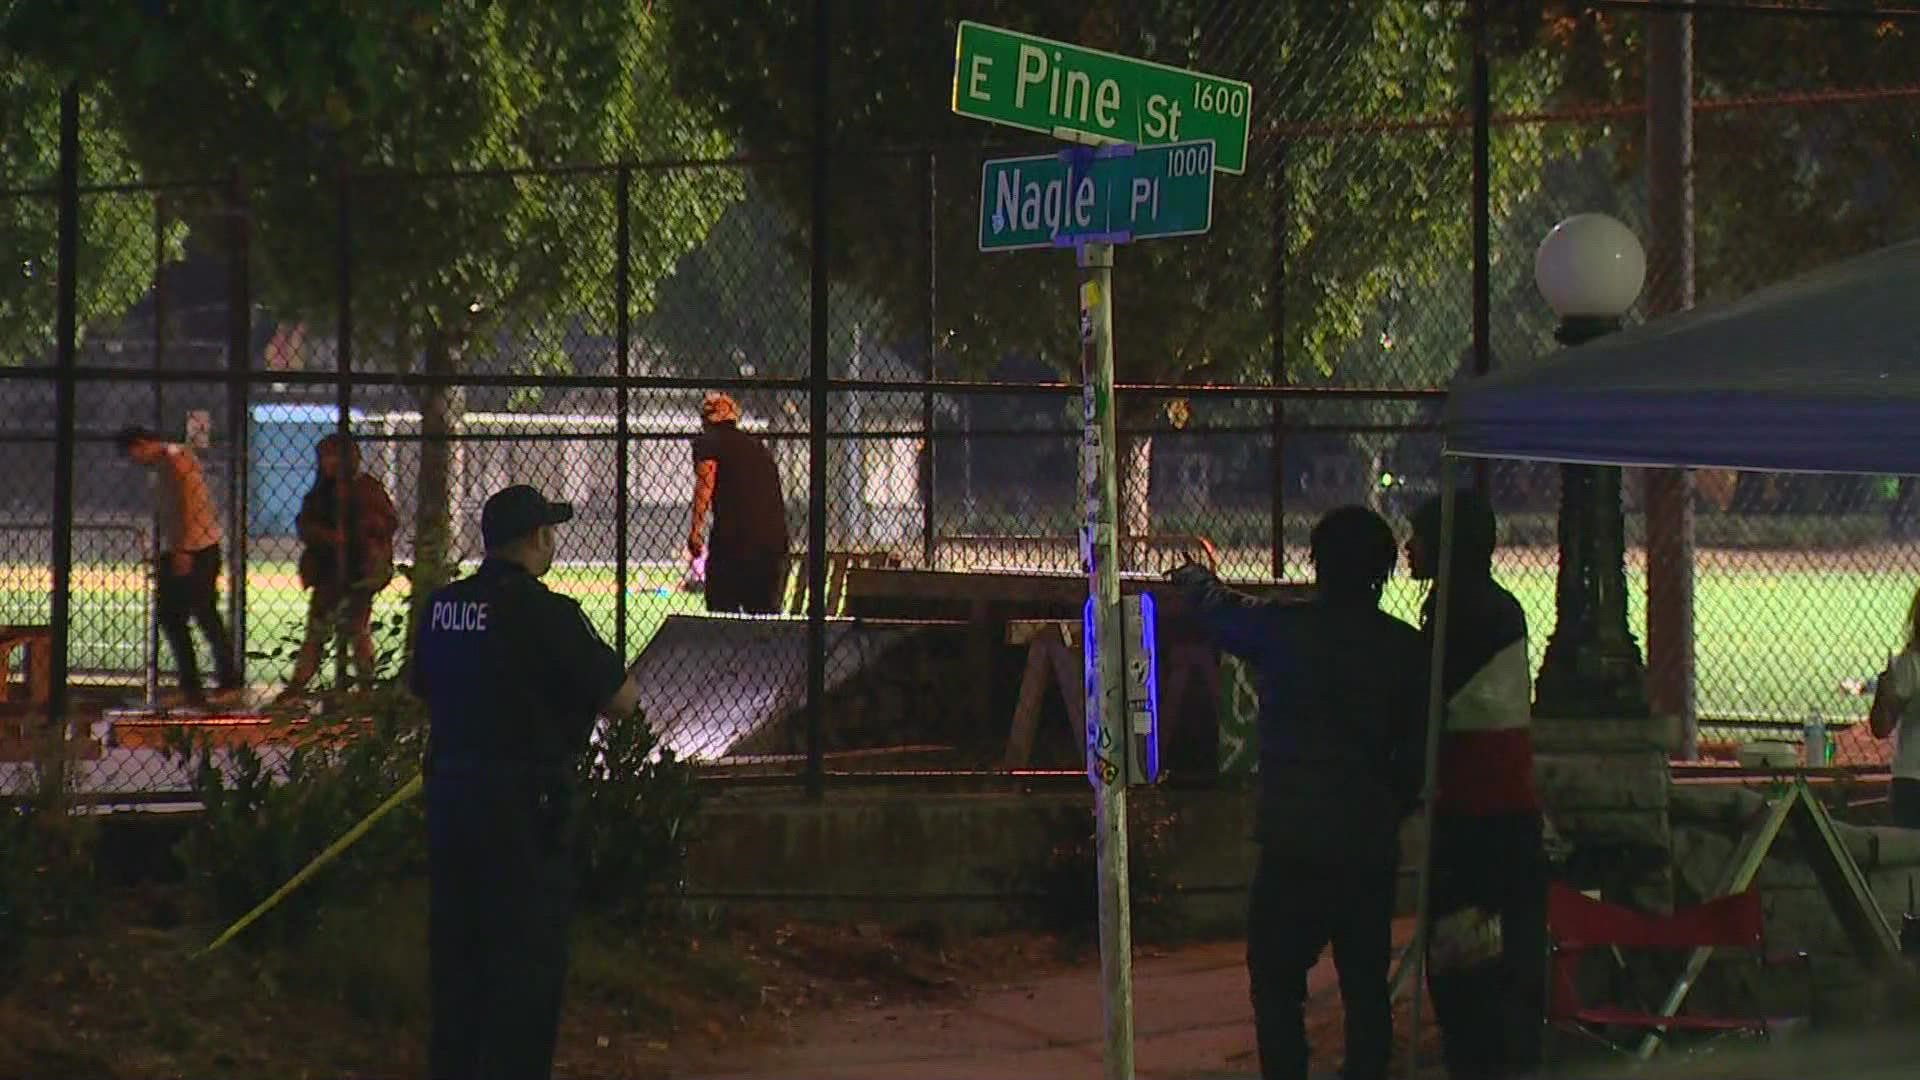 A man was killed in a deadly shooting at Cal Anderson Park early Saturday morning, according to the Seattle Police Department.